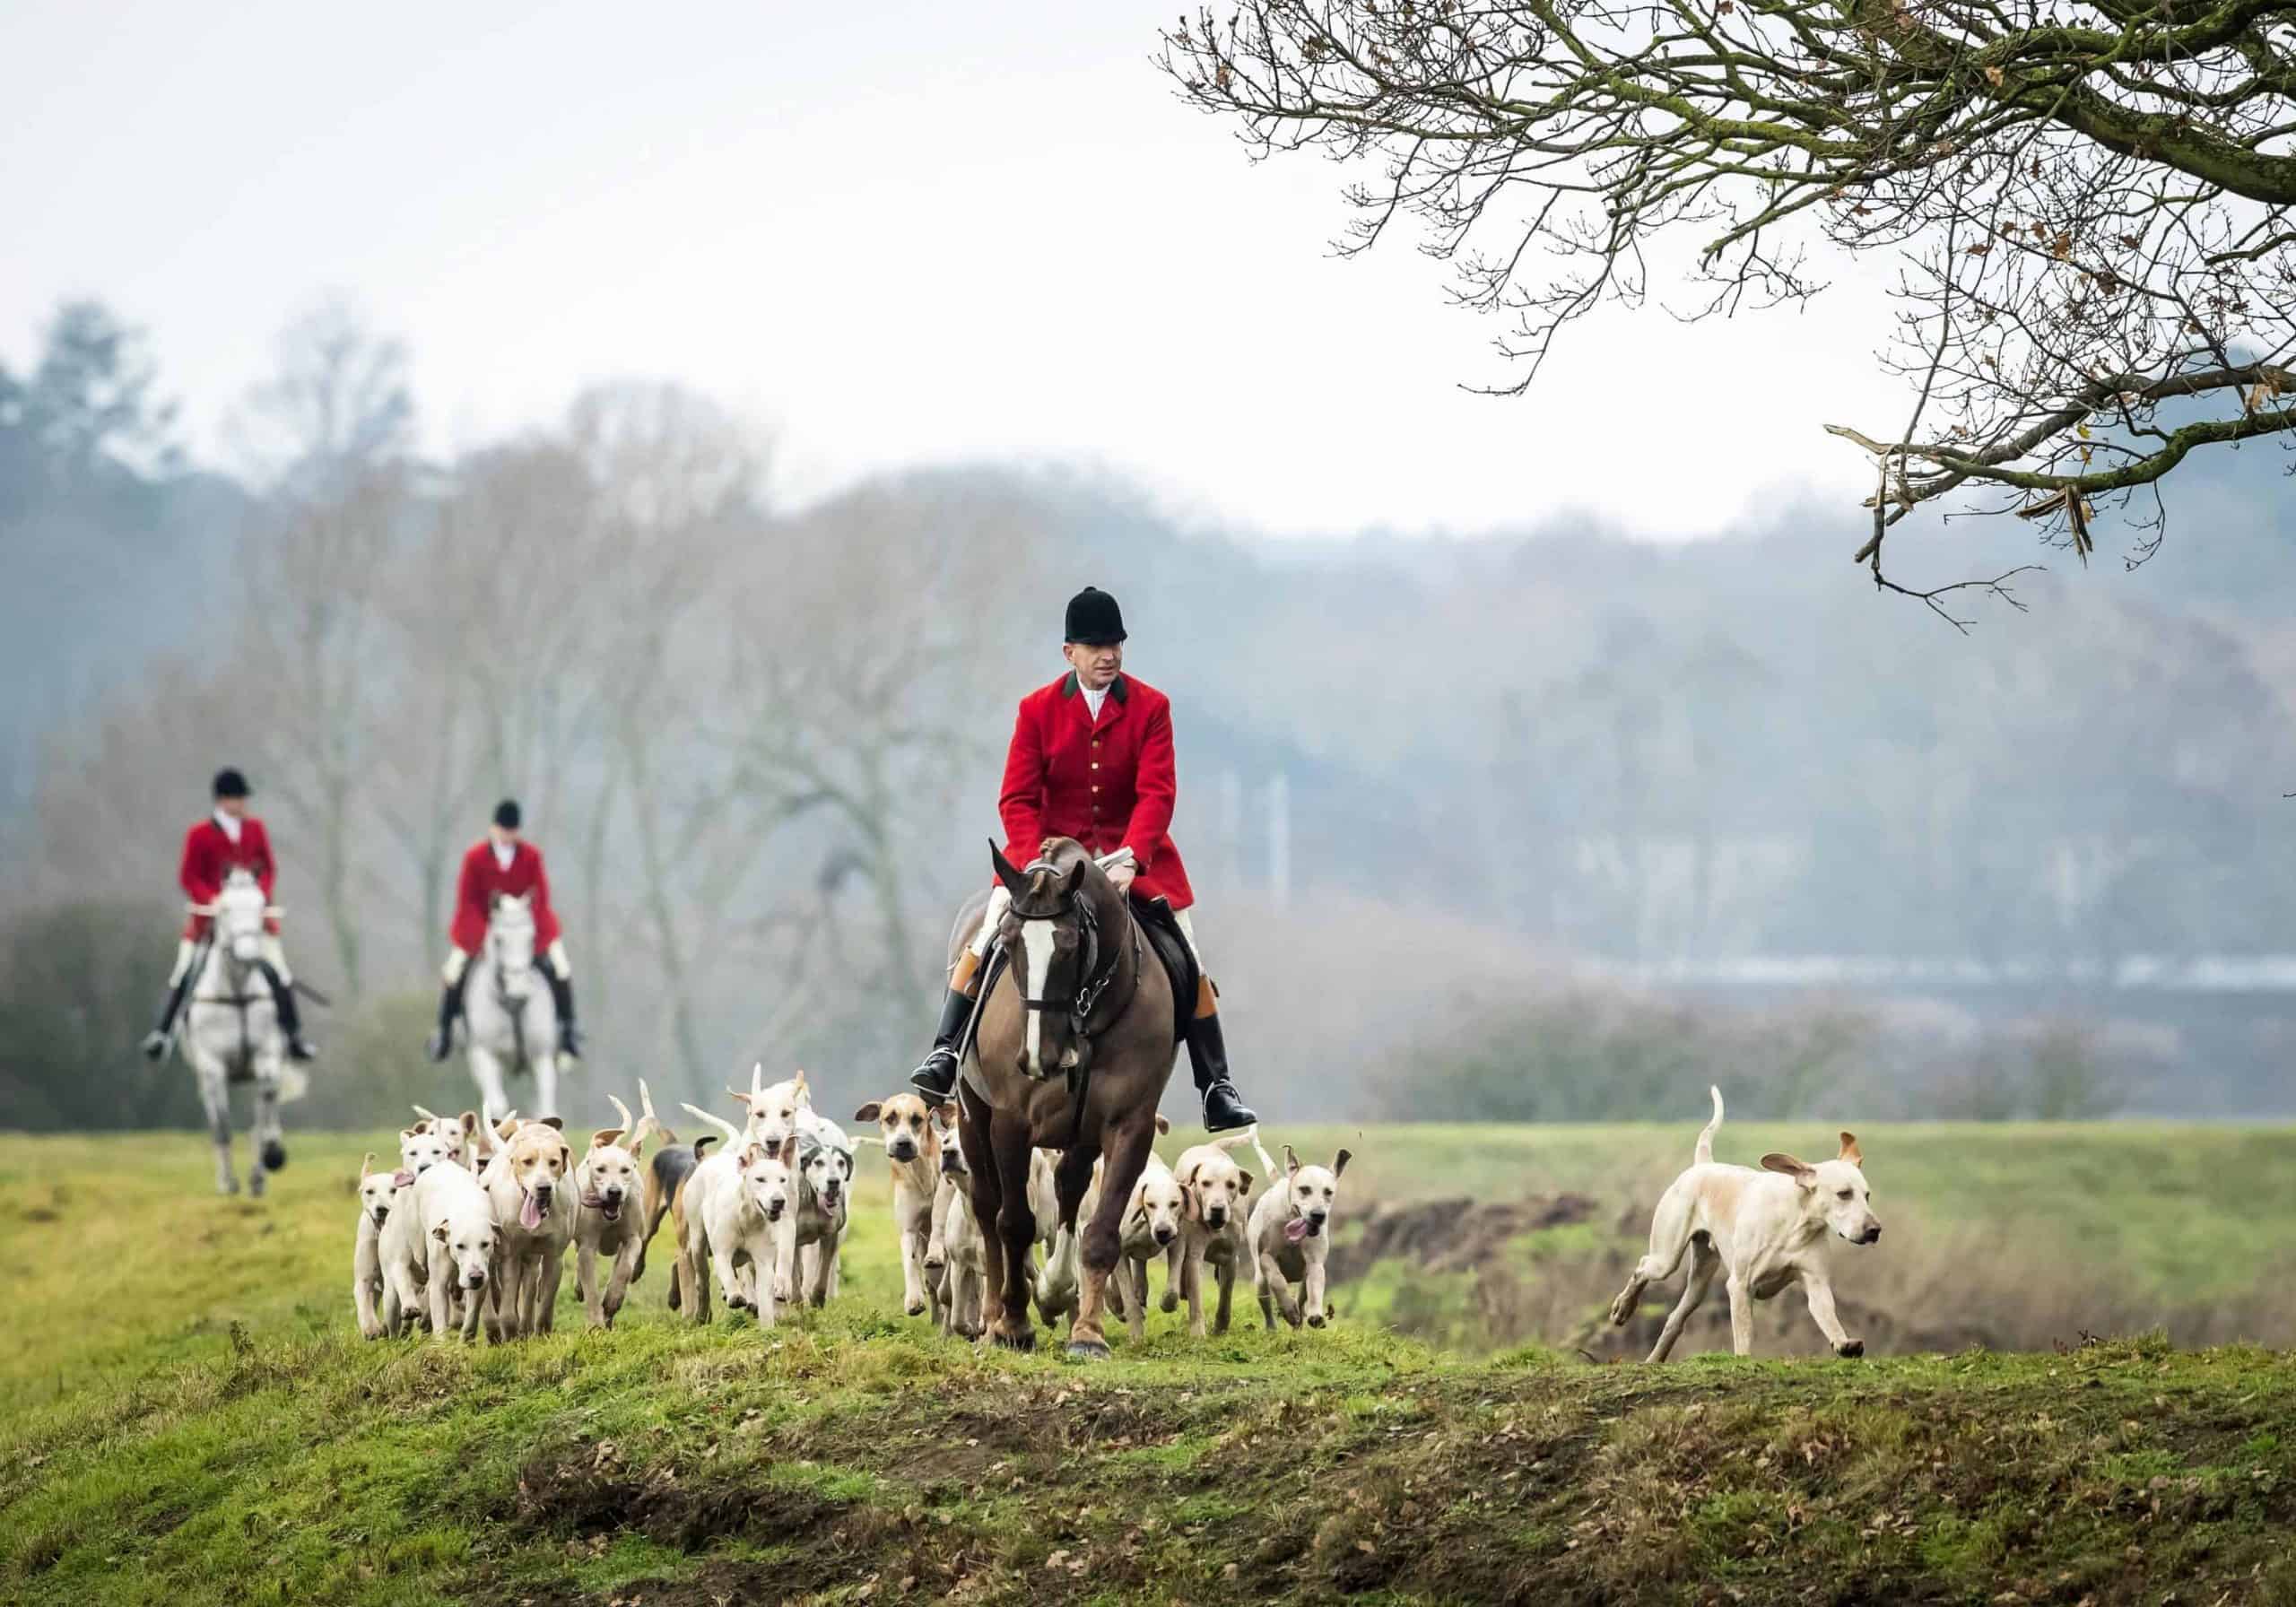 Two-year-old girl dies after falling from a pony during hunt